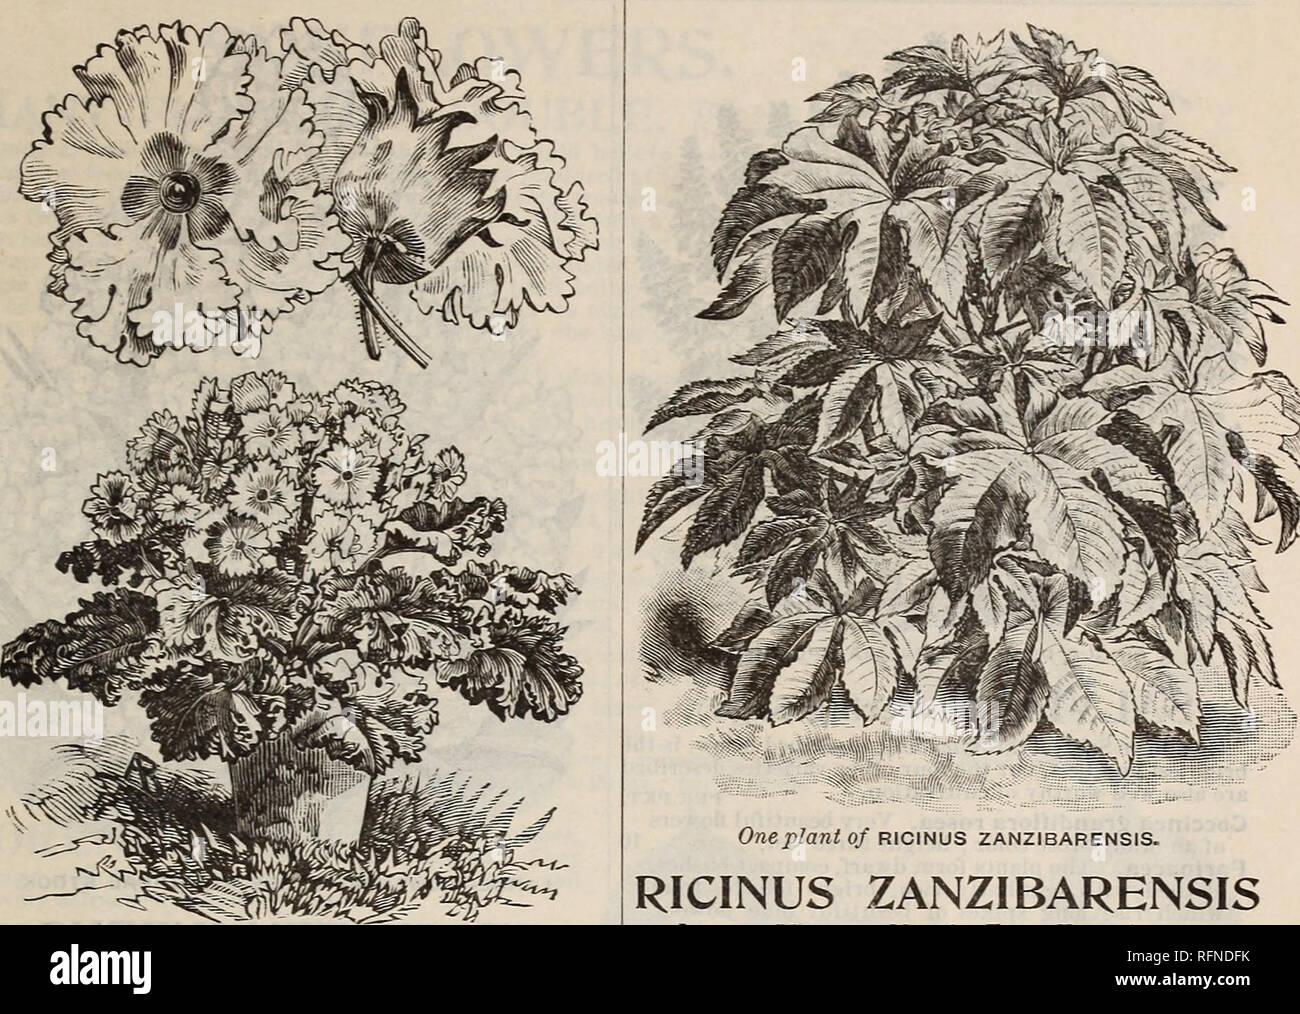 . Burpee's farm annual written at Fordhook Farm. Nurseries (Horticulture) Pennsylvania Philadelphia Catalogs; Vegetables Seeds Catalogs; Plants, Ornamental Catalogs; Flowers Seeds Catalogs. FORDHOOK FLOWER SEEDS. 121. PRIMULA FIMBRIATA—SINGLE CHINESE PRIMROSE. PRIMULA SINENSIS FIMBRIATA. FRINGED CHINESE PRIMROSE. The Chinese Primrose is the most beautiful and satisfac- tory of all house plants for winter blooming, and is as easily grown as a Geranium. They are raised so easily that every flower-lover should hare a magnificent display of these brightest and best of all winter flowers in the hou Stock Photo